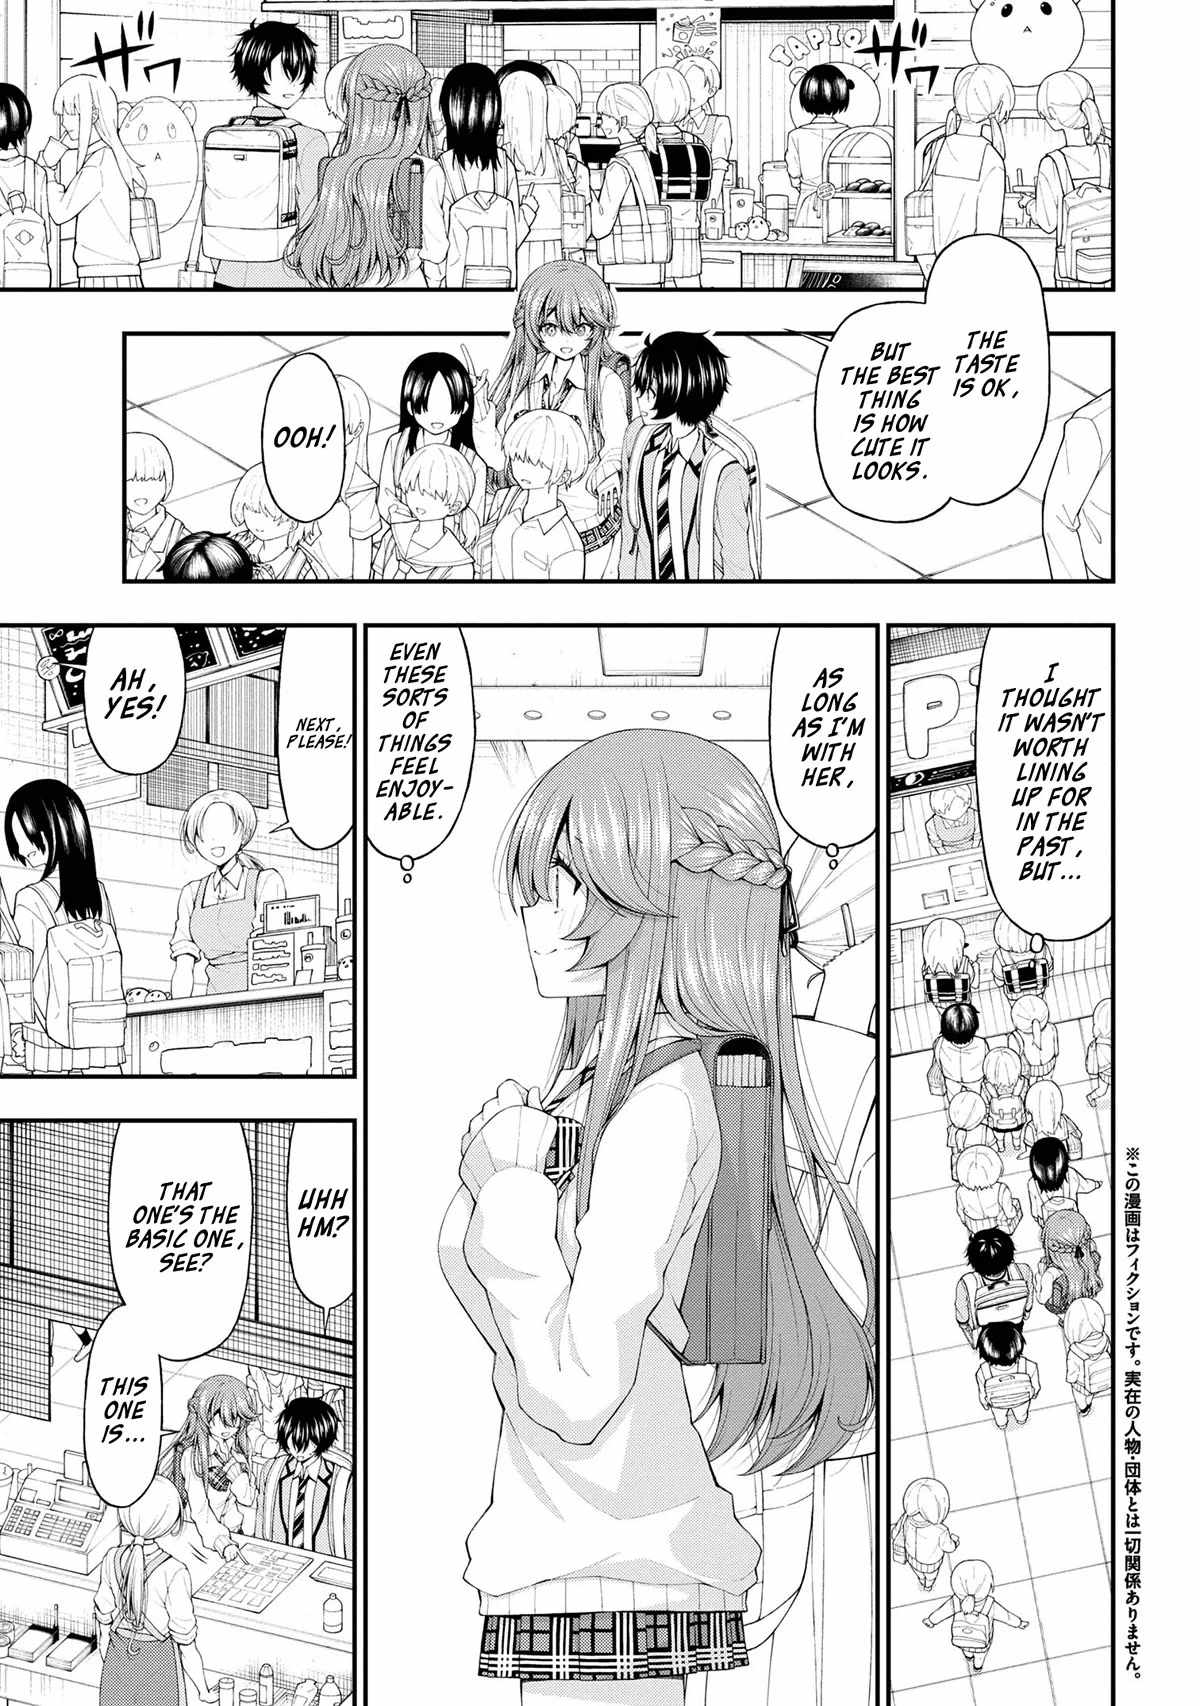 The Gal Who Was Meant to Confess to Me as a Game Punishment Has Apparently Fallen in Love with Me Chapter 14-eng-li - Page 2